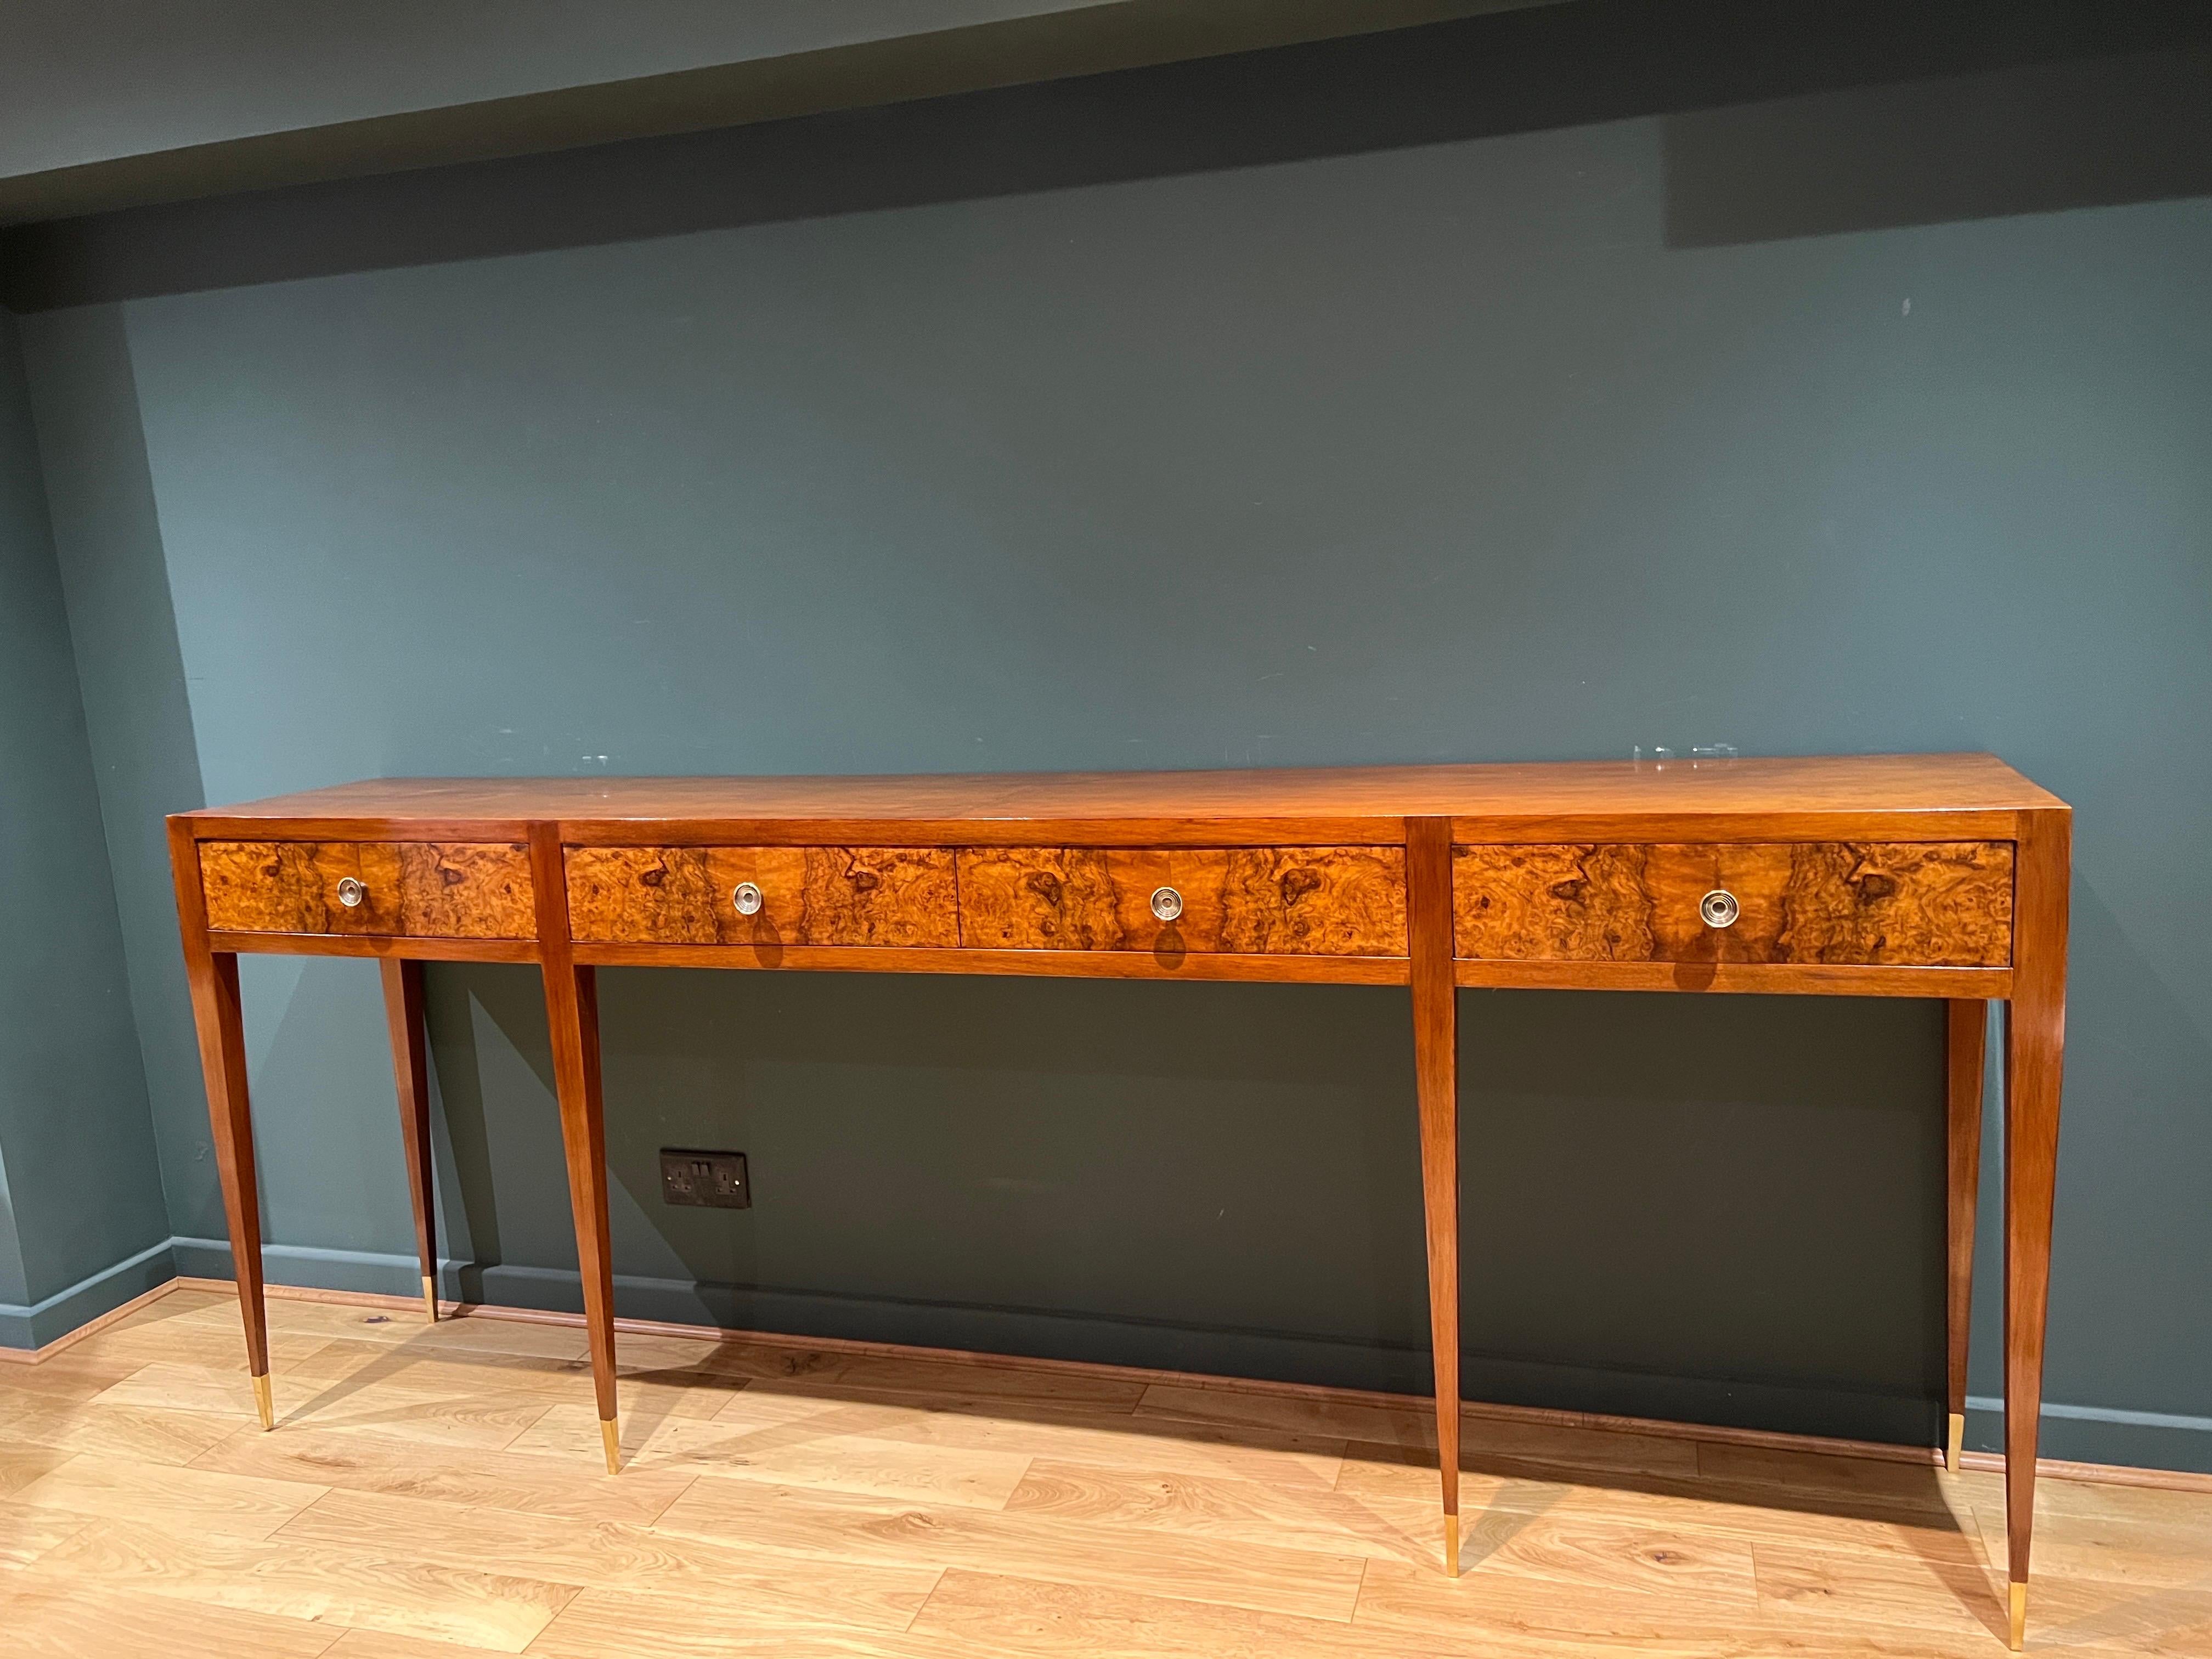 A beautifully crafted large console table in cherrywood with four drawers in contrasting burl walnut and brass handles . The console stands on four legs to the front and two to the back all with brass sabots. 
This piece was acquired by our client